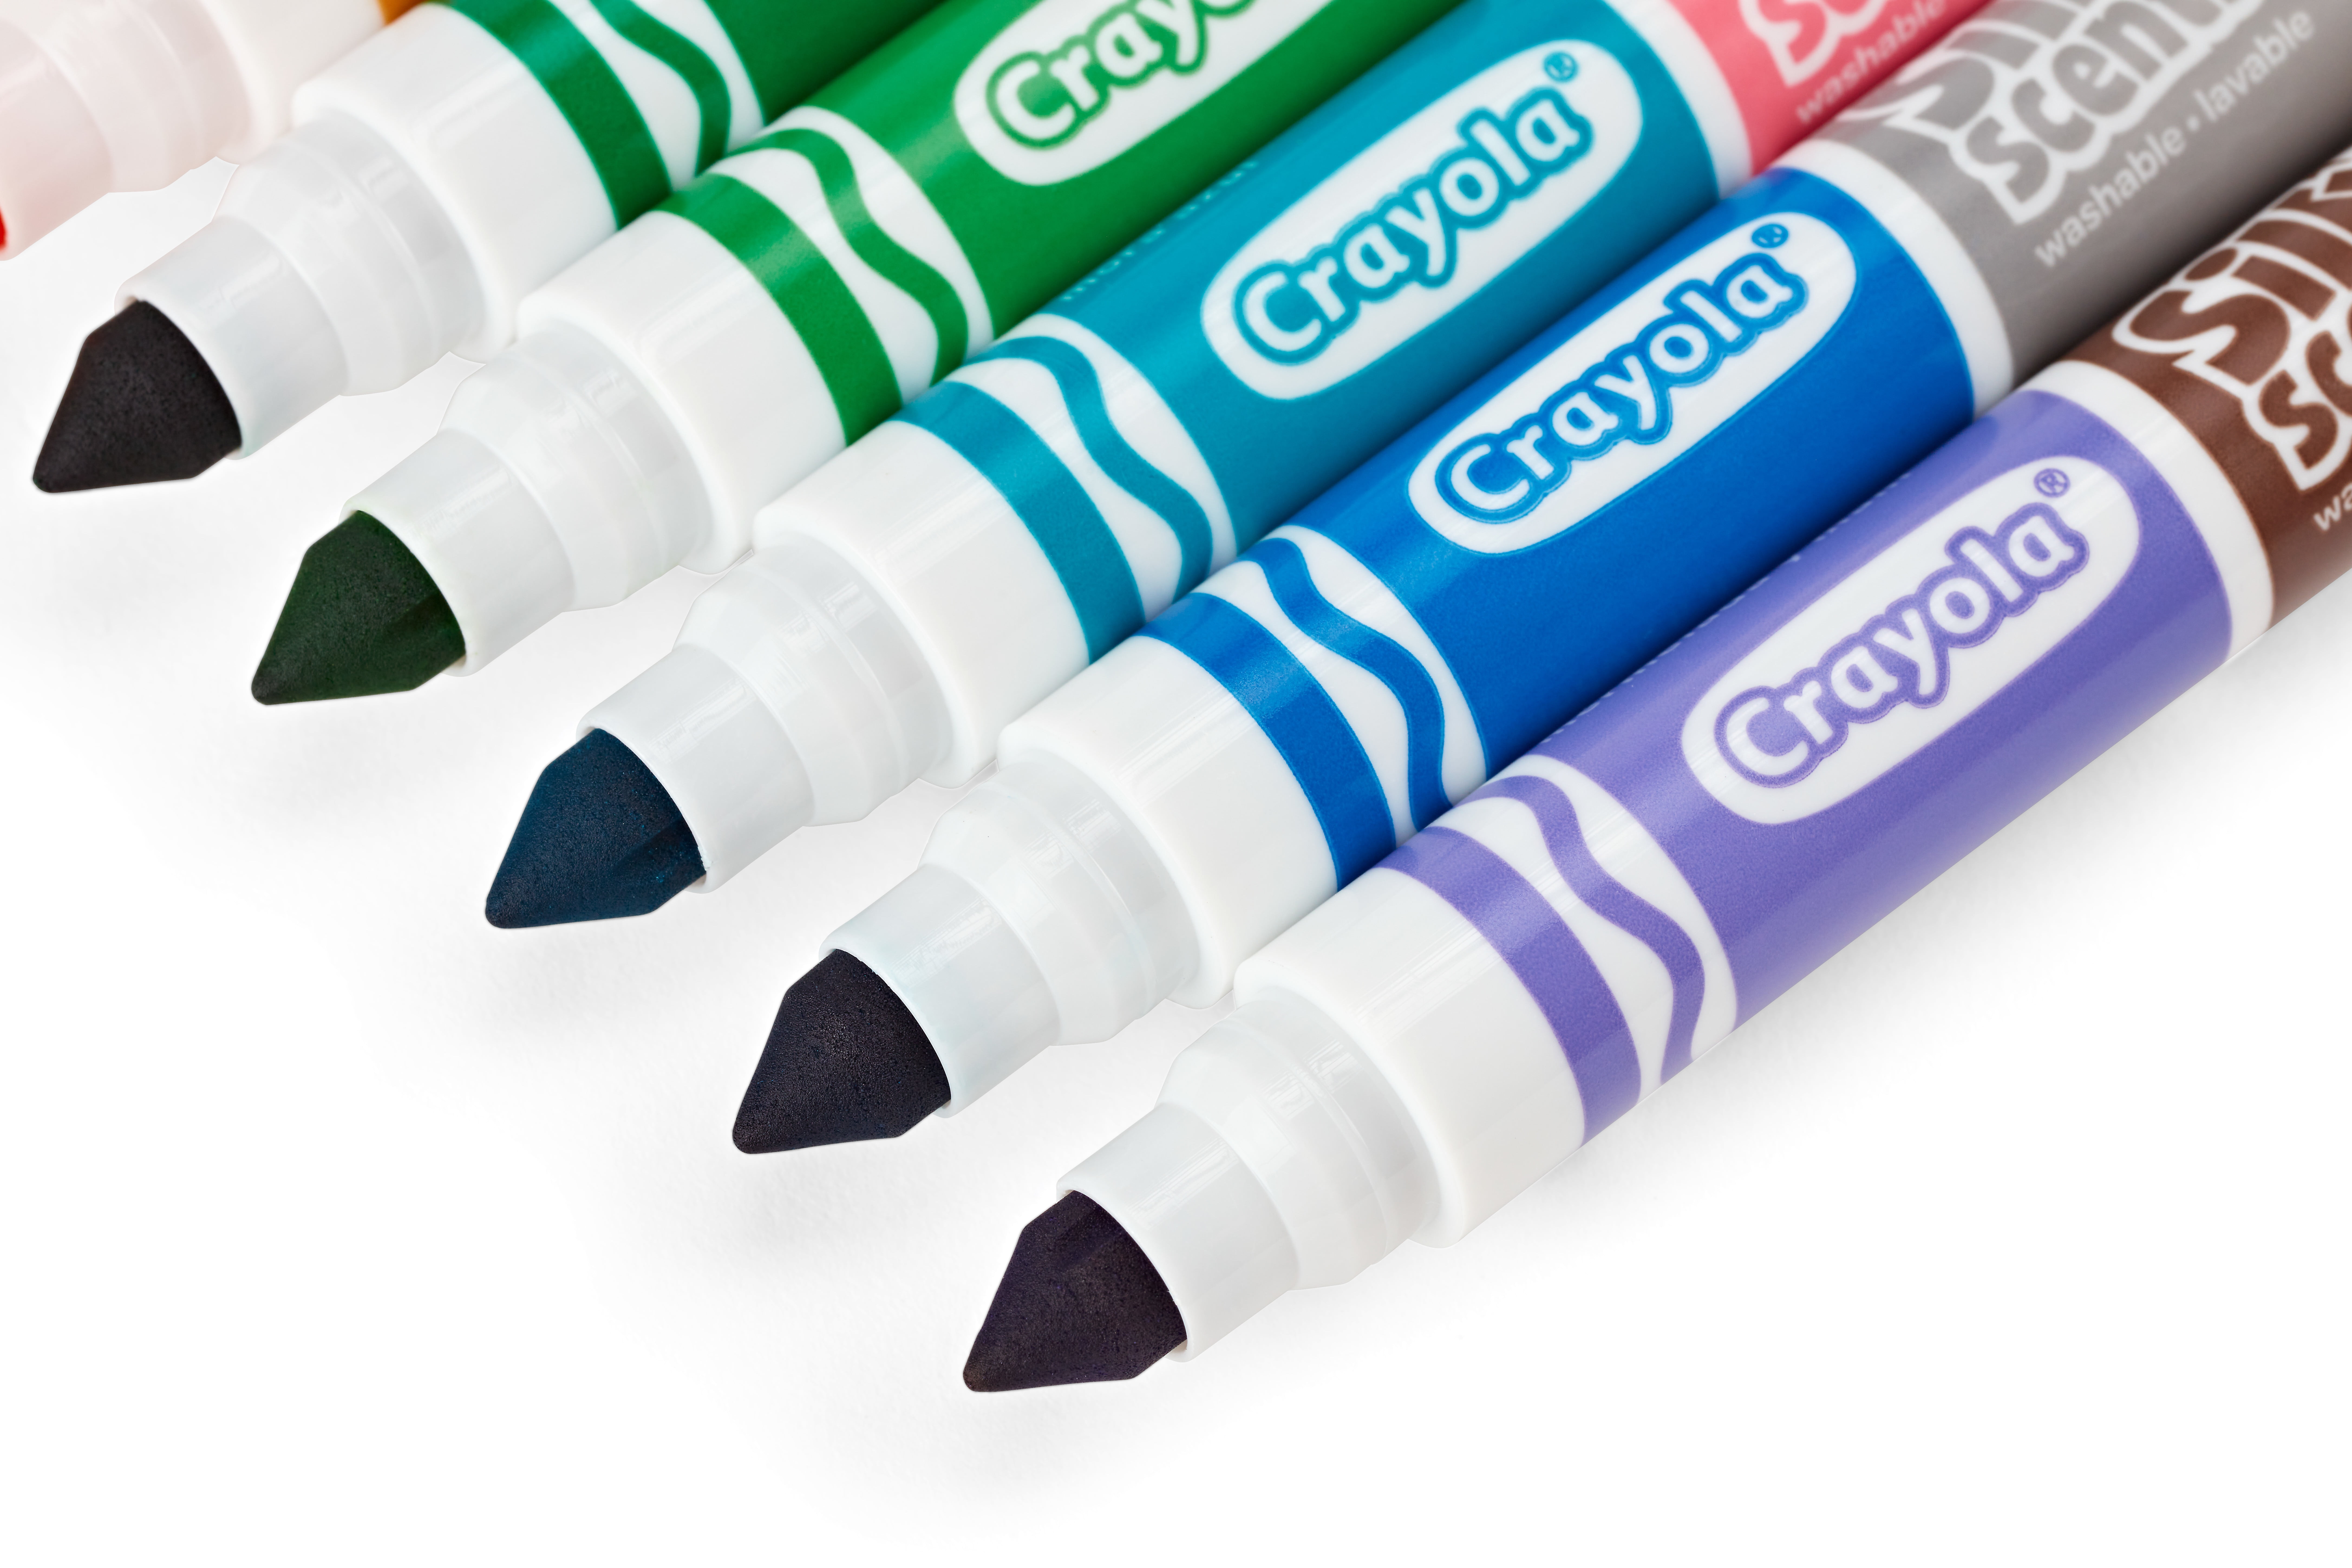 Crayola® Silly Scents™ Wedge Tip Washable Markers - Assorted